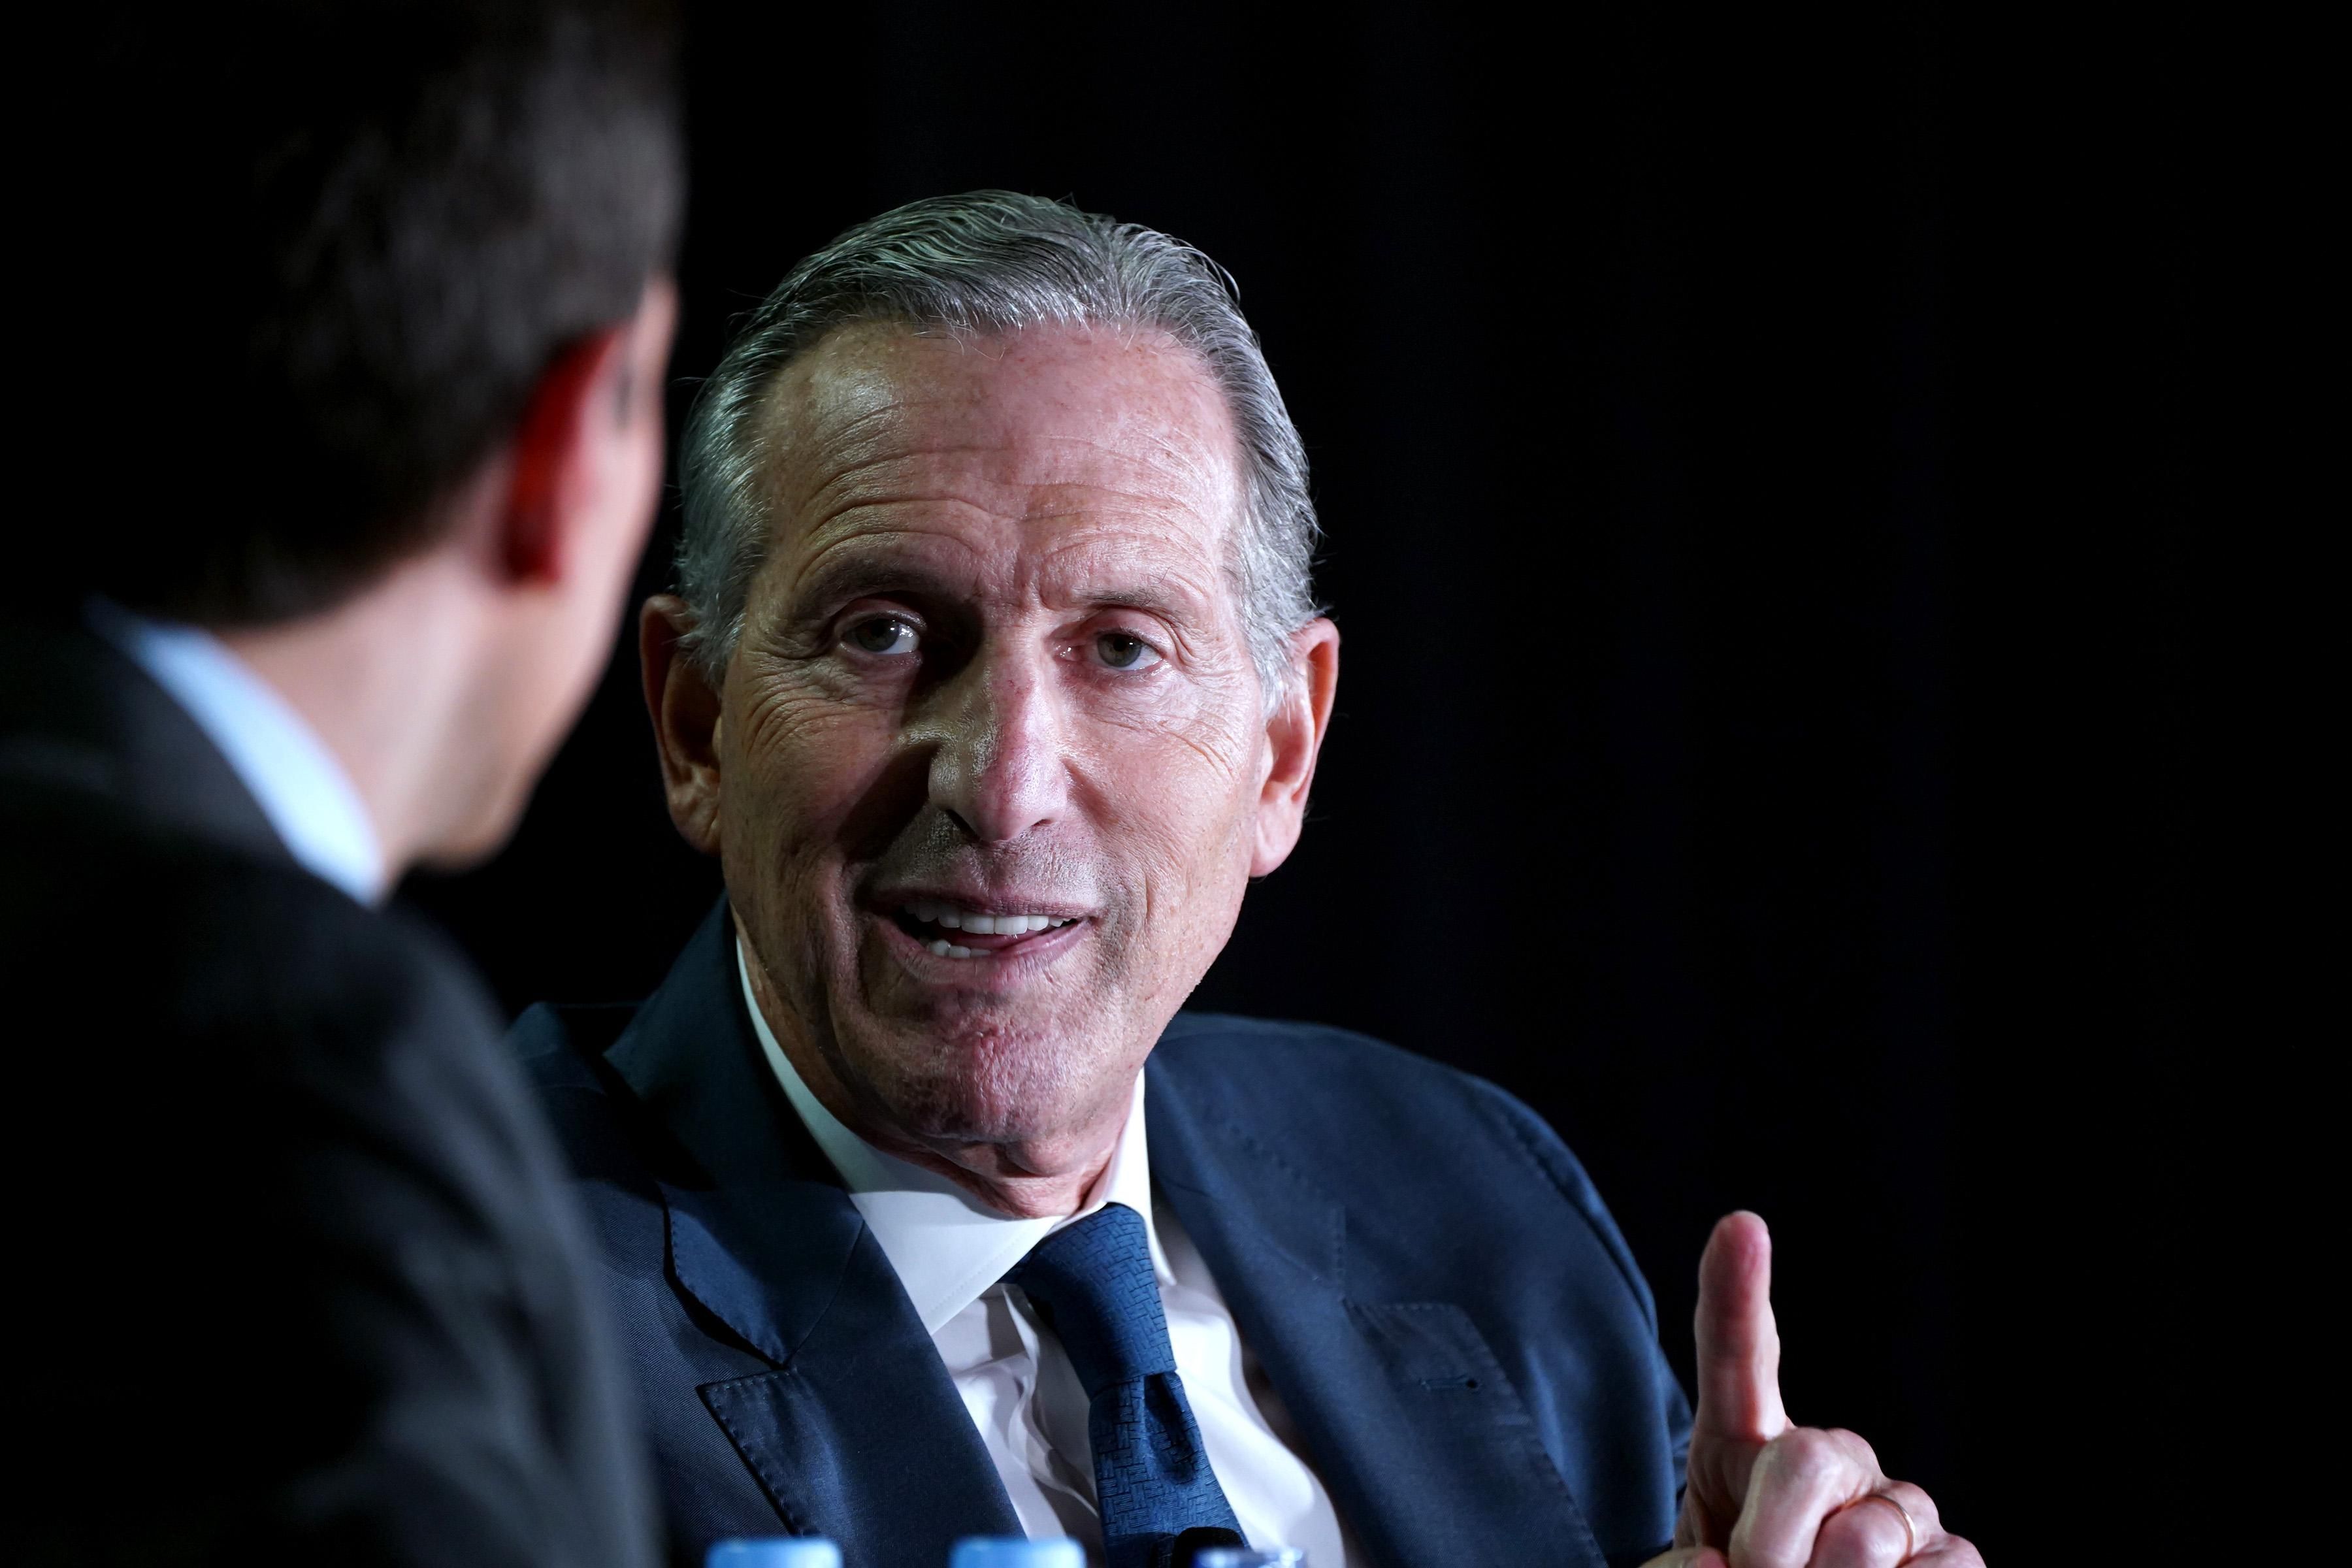 Starbucks CEO Howard Schultz speaks onstage at the New York Times DealBook D.C. policy forum on June 9, 2022 in Washington, D.C.